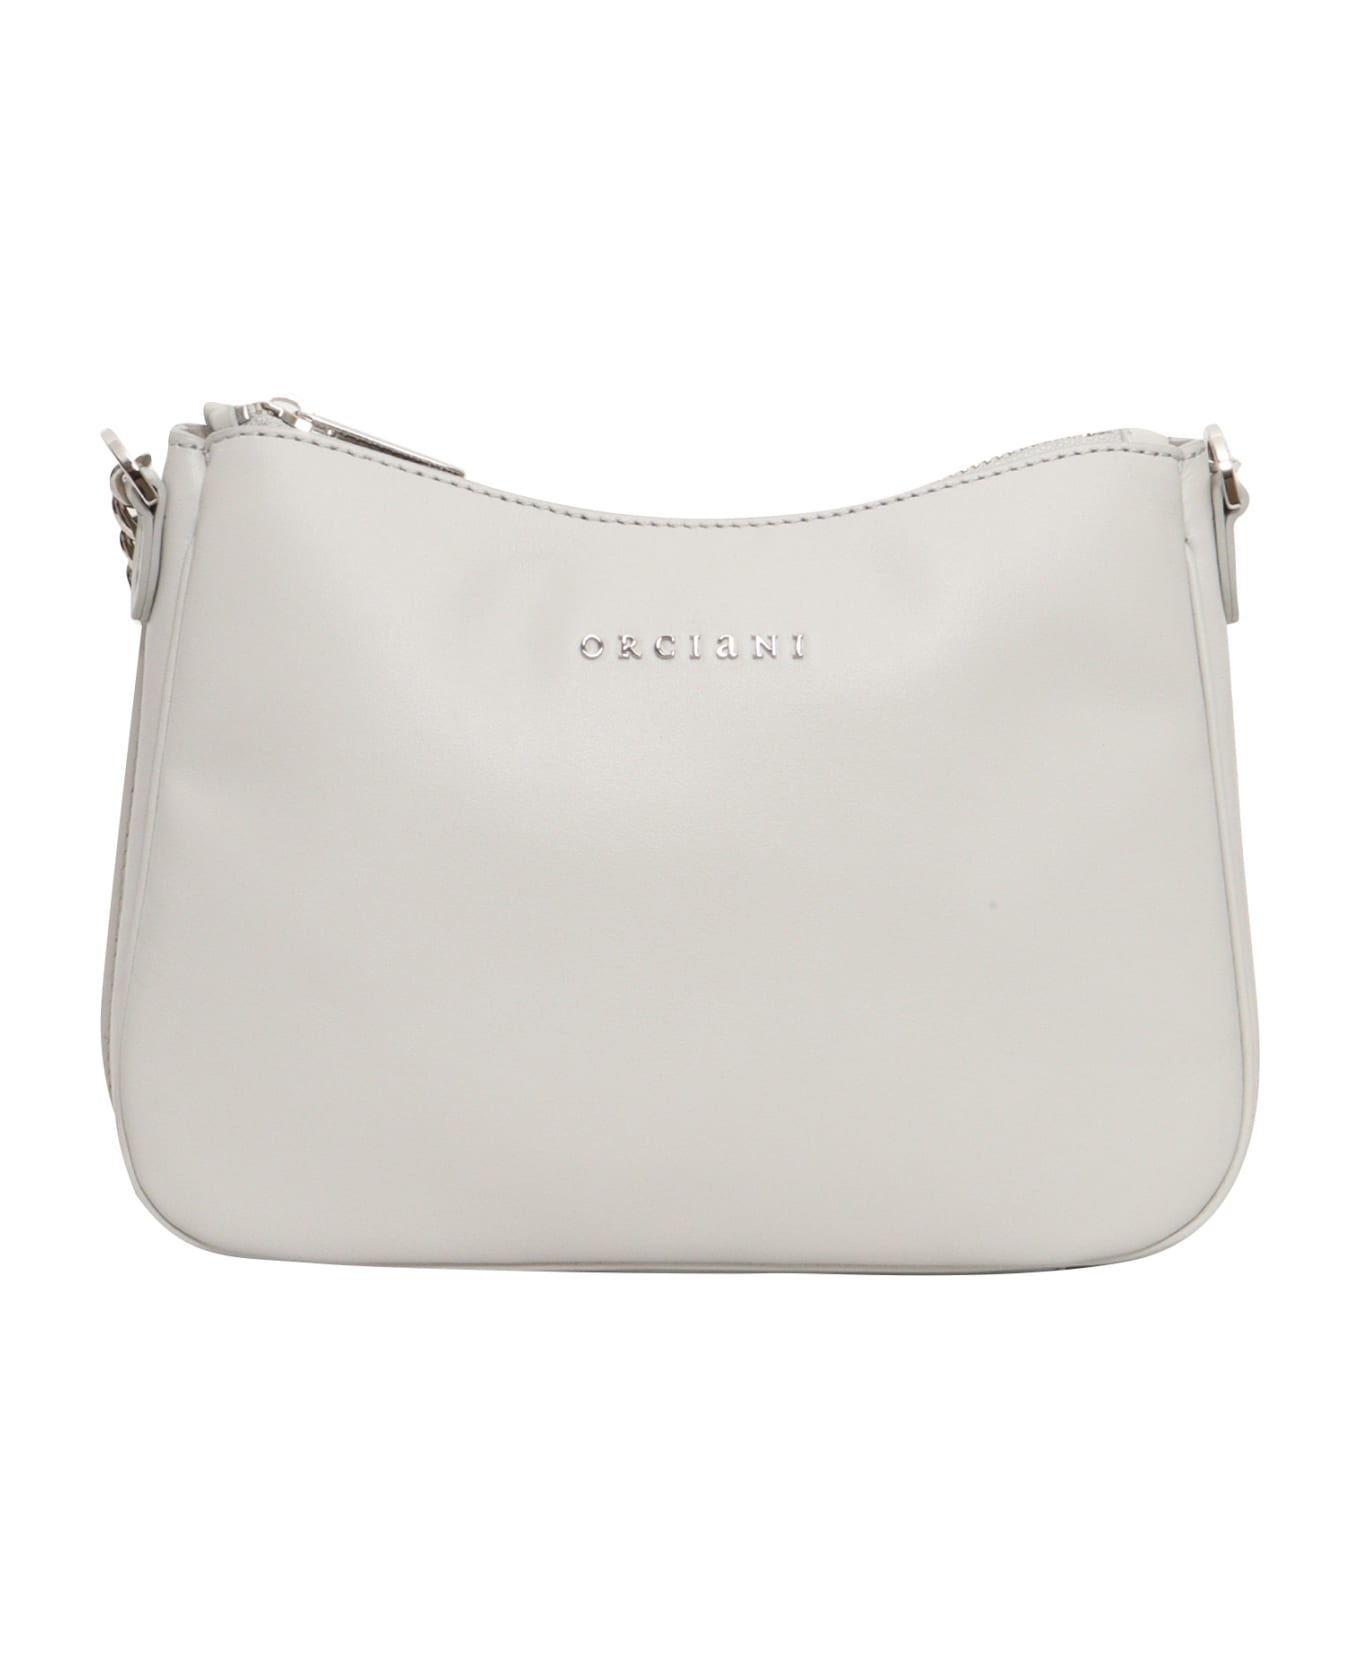 Orciani White Clutch Bag - WHITE トートバッグ